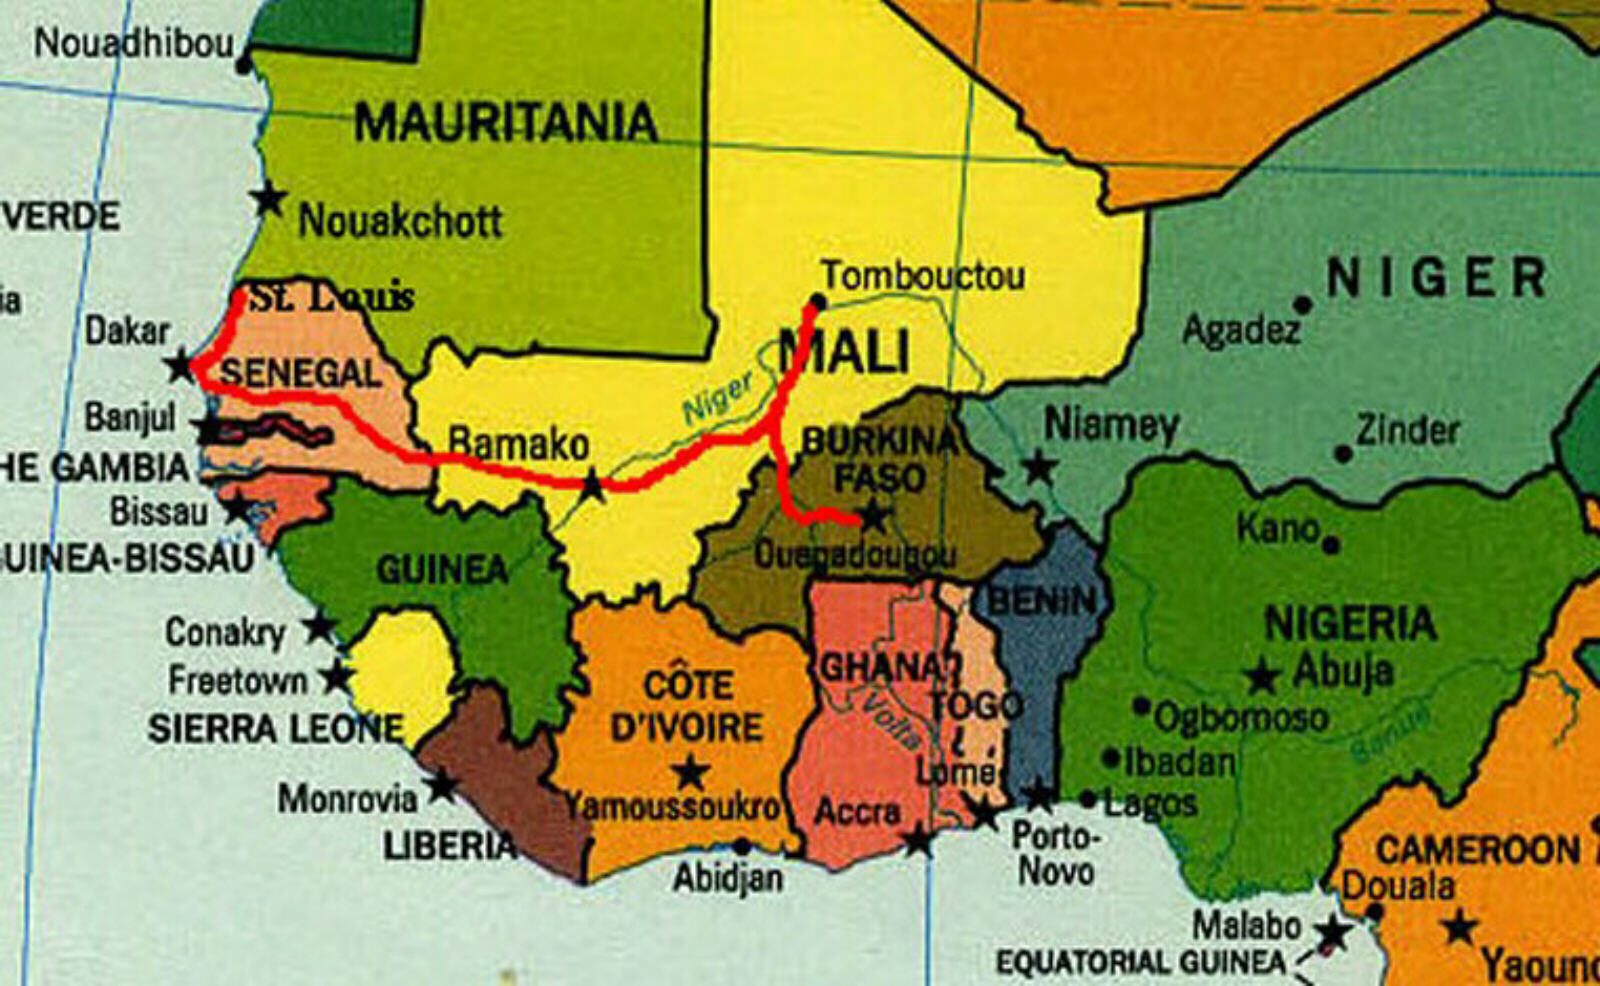 Our route through west Africa from Dakar to Timbuktu